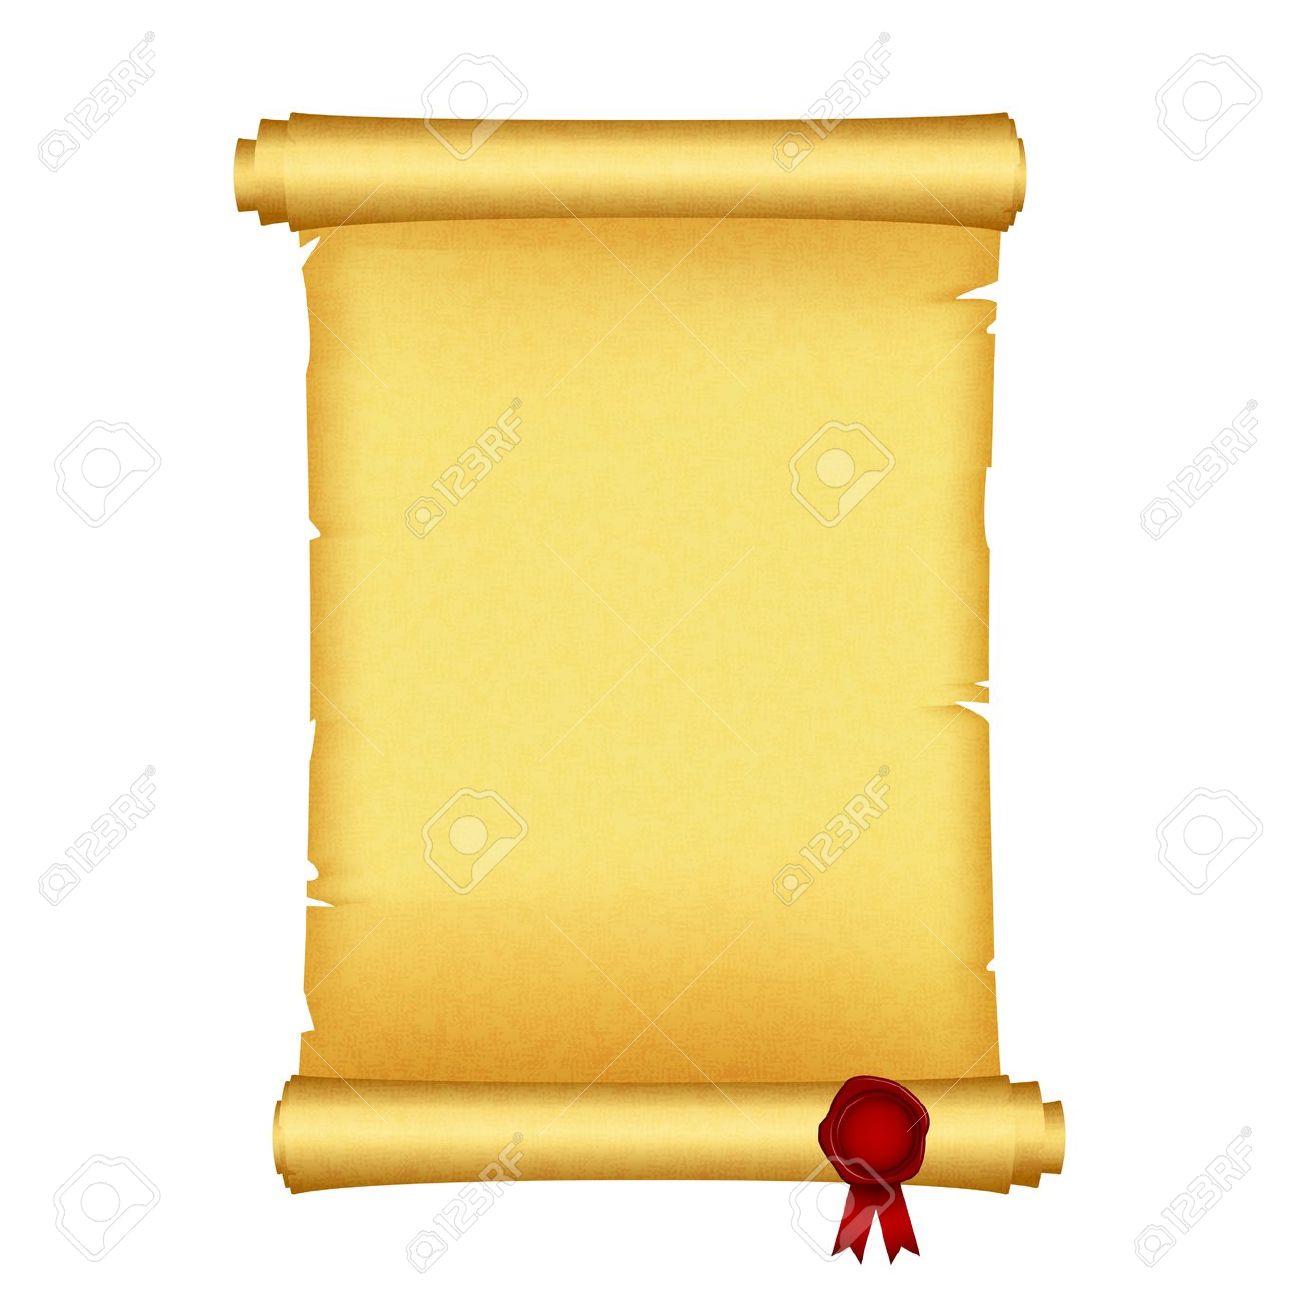 Laws clipart border. Legal scroll cliparts free